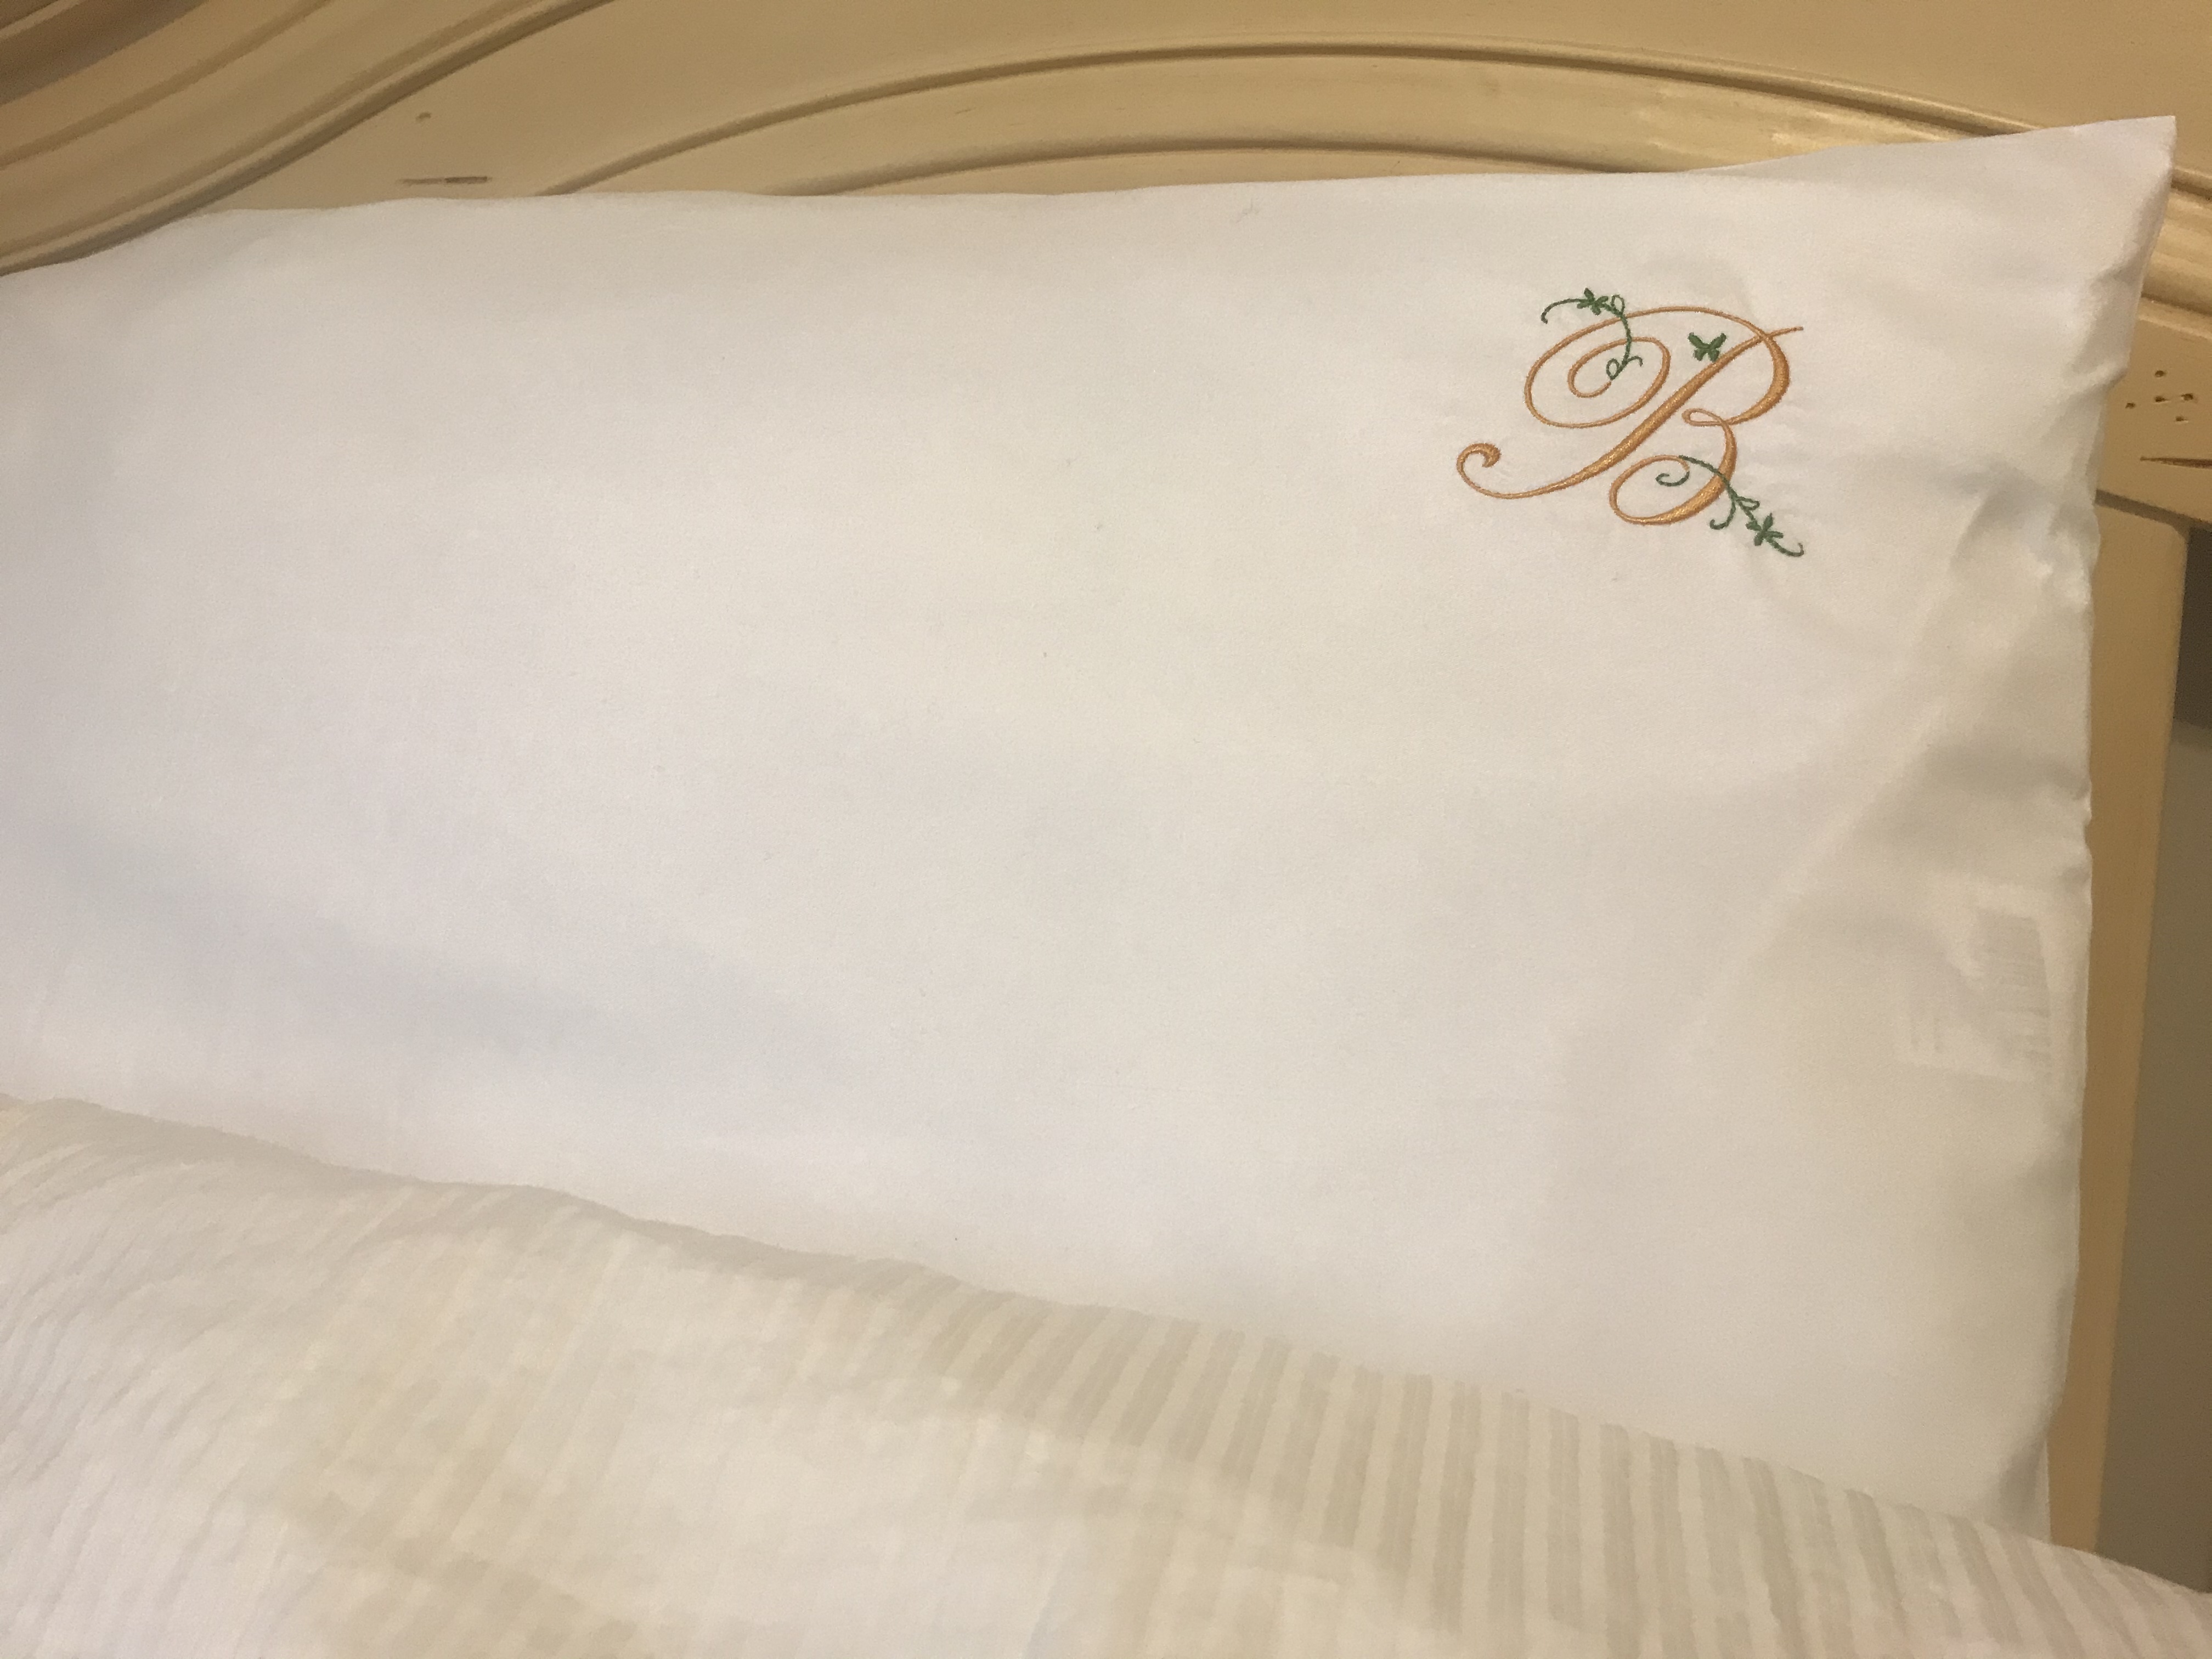 New     Personalized Embroidered Pillowcases - Microfiber